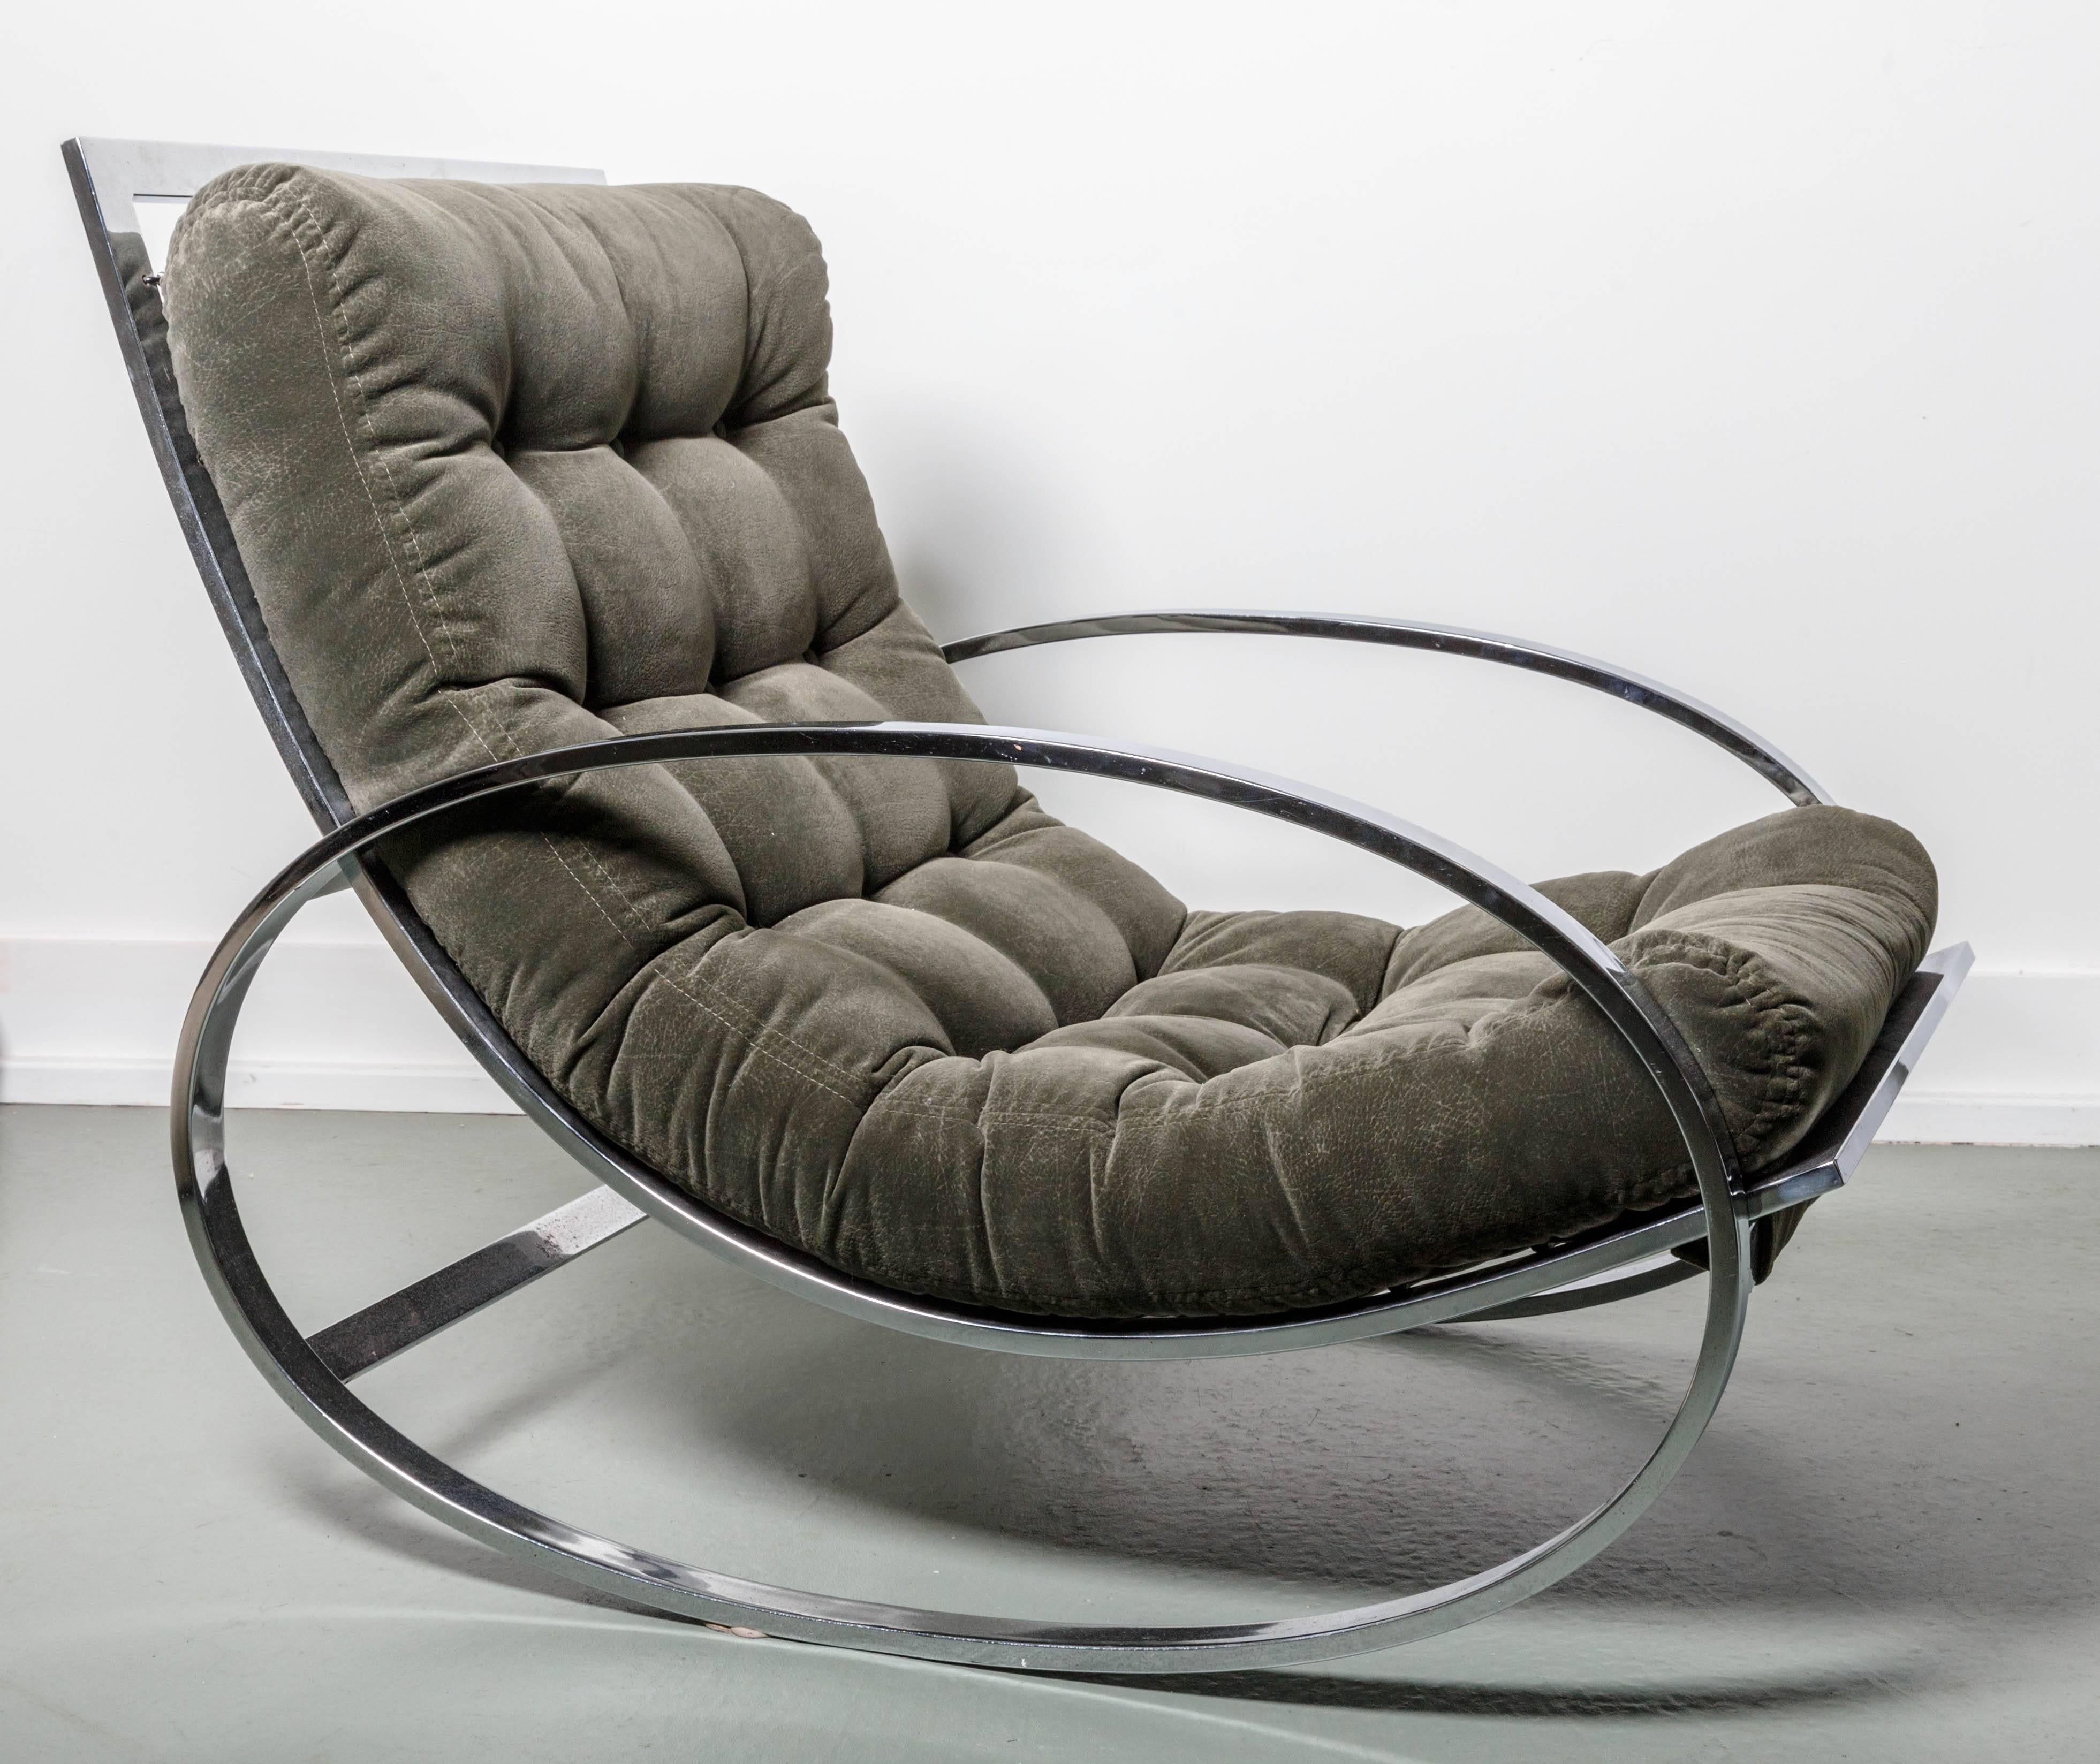 20th Century Renato Zevi Ellipse Rocking Chair and Ottoman, in the style of Milo Baughm